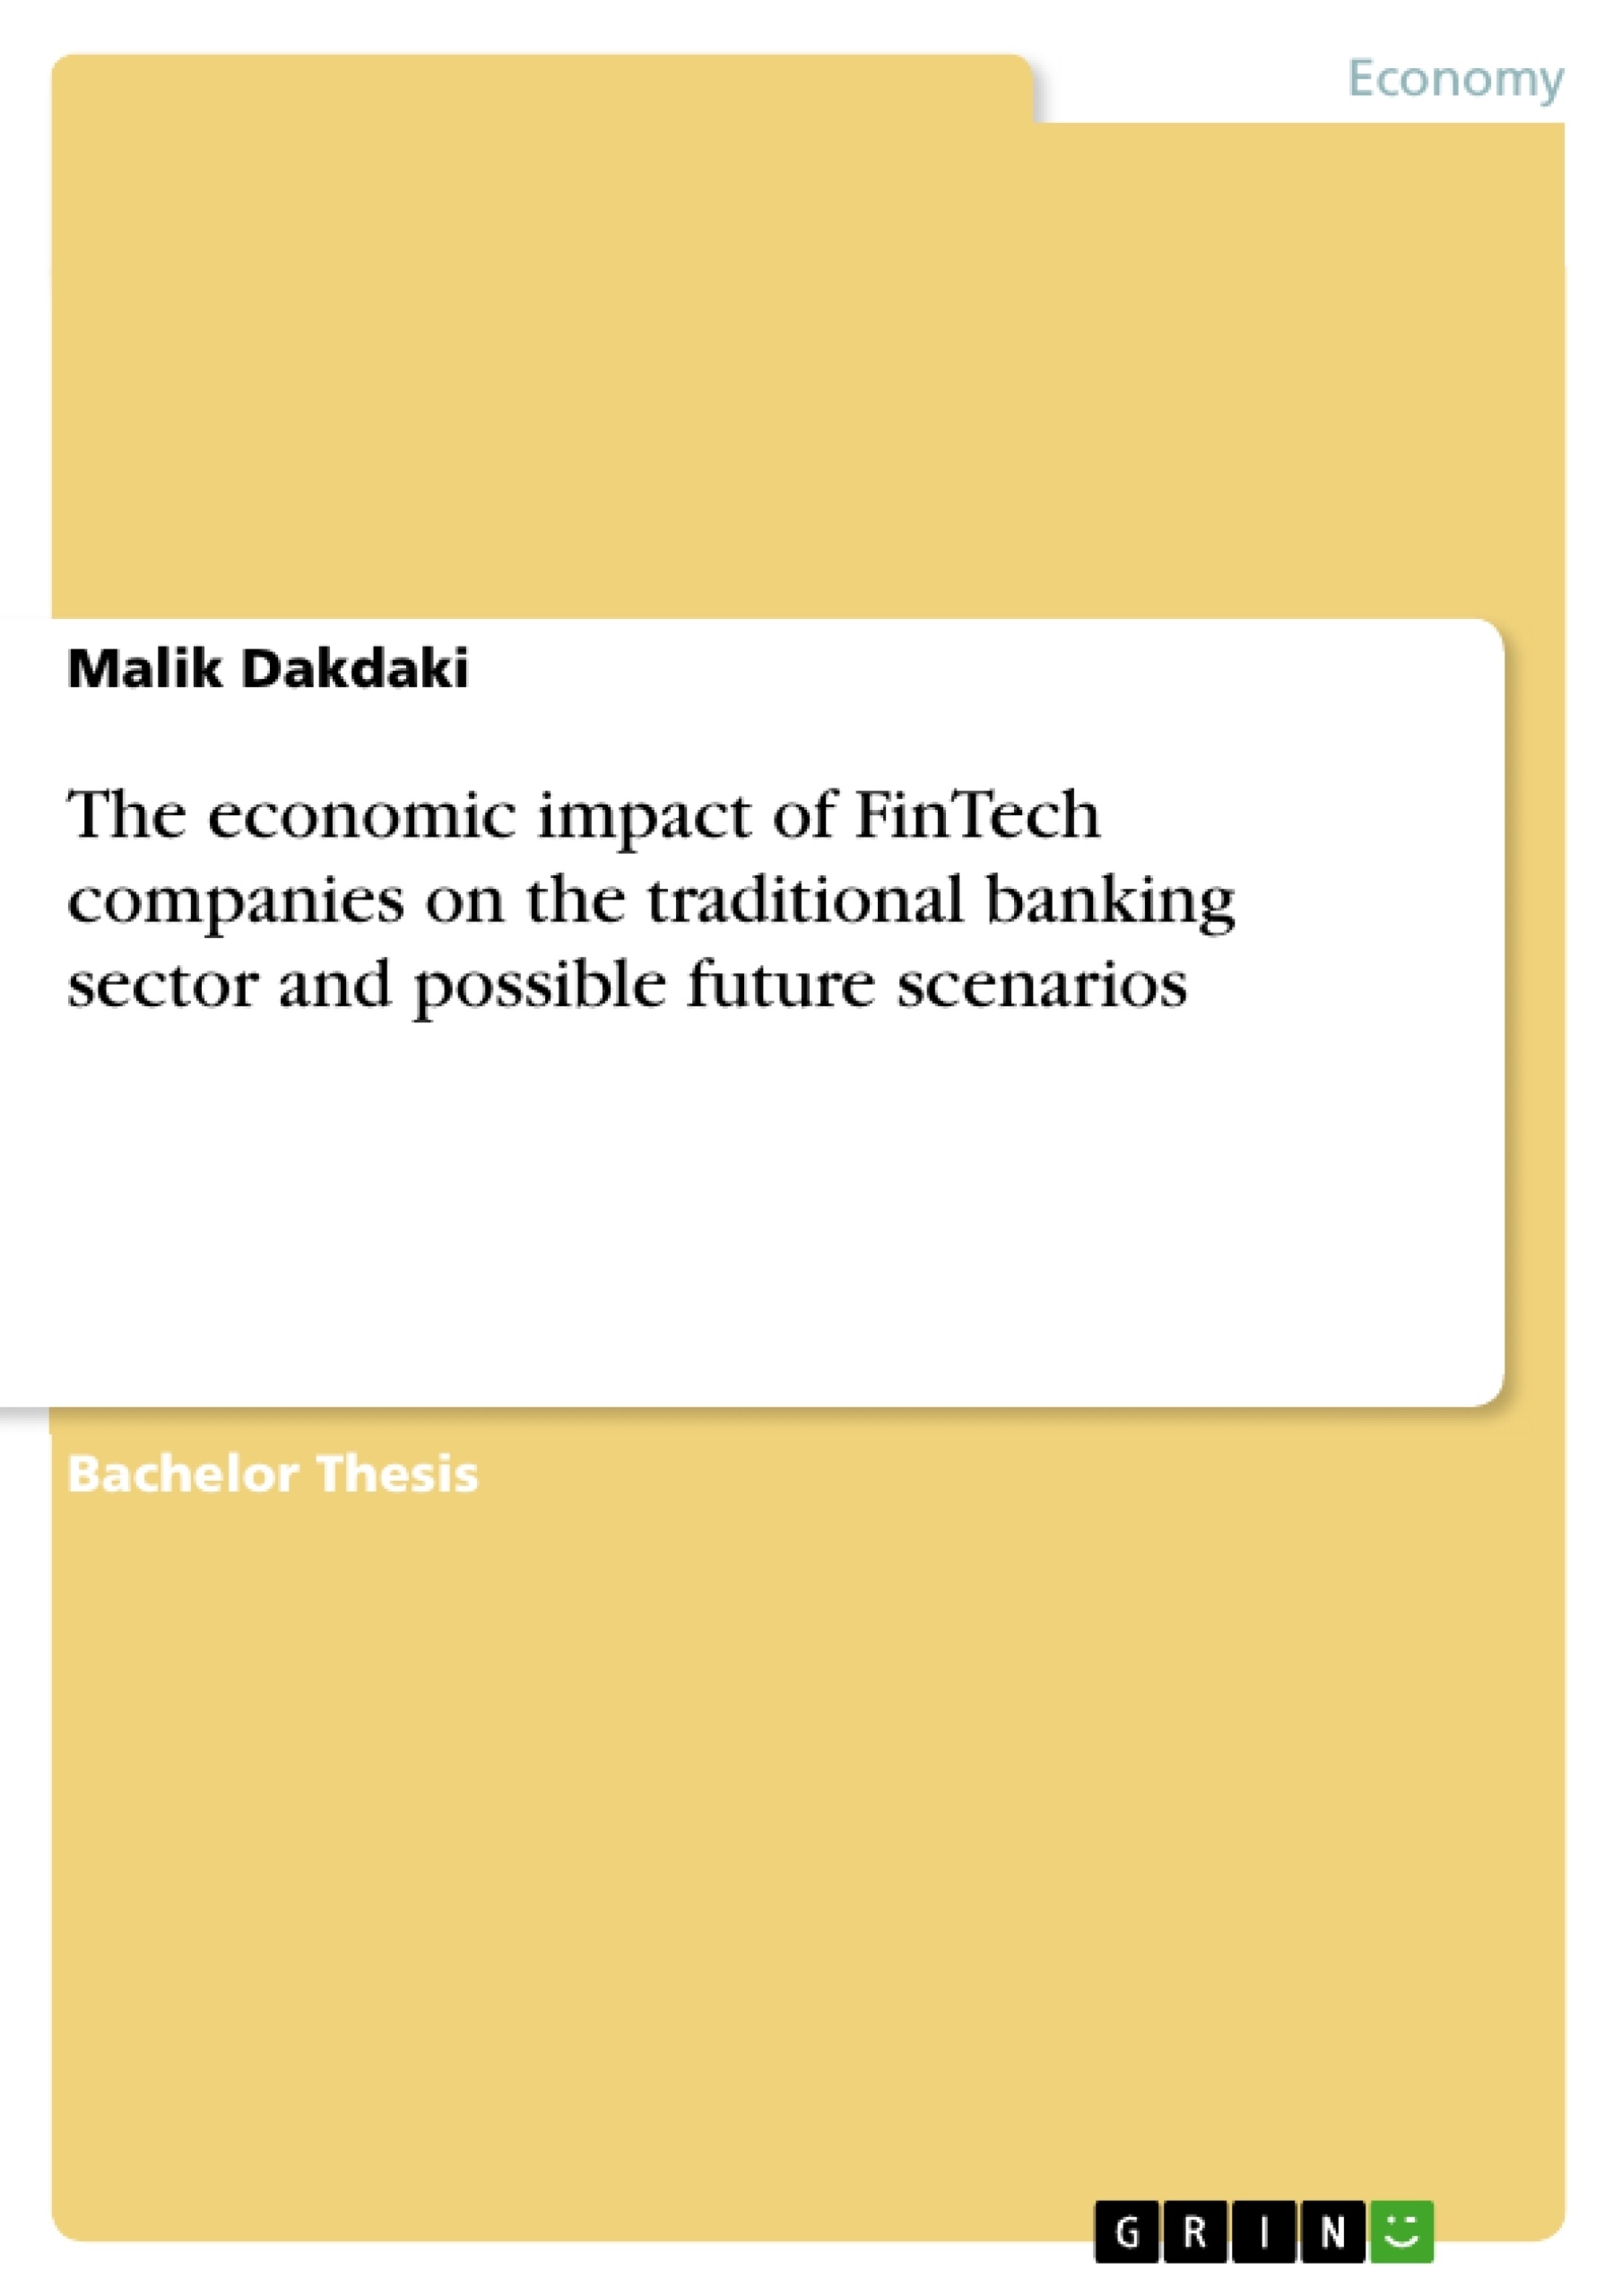 Title: The economic impact of FinTech companies on the traditional banking sector and possible future scenarios